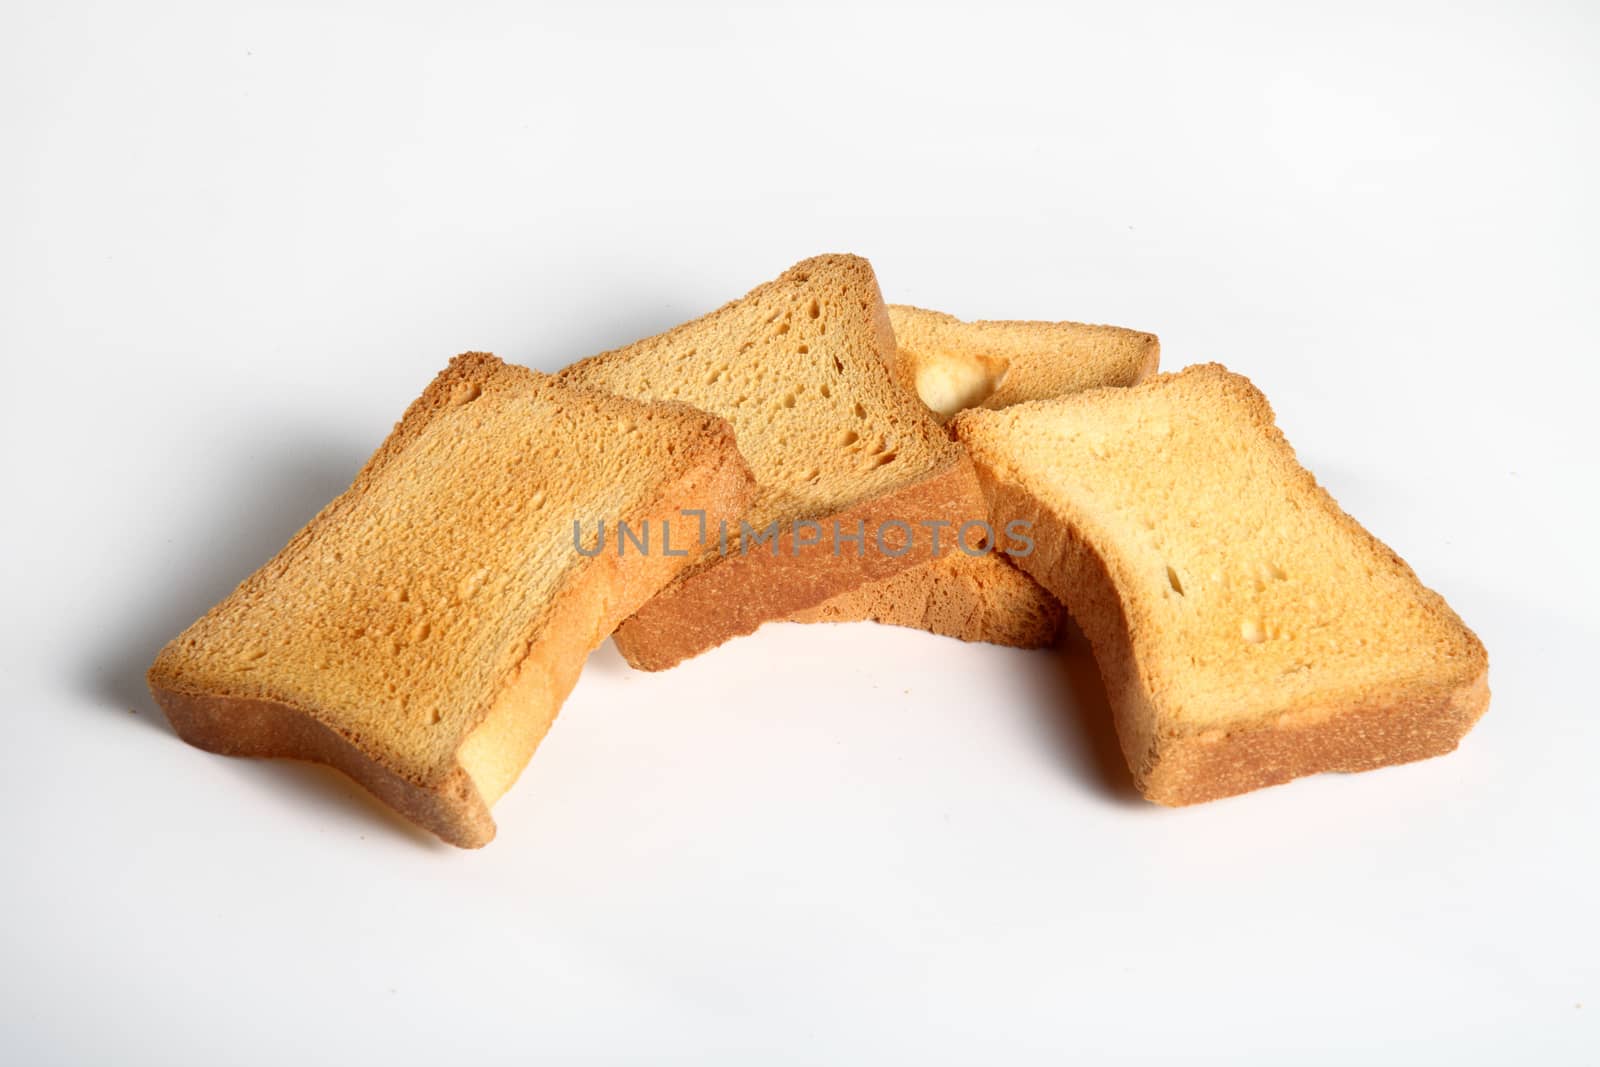 group of slices toast by diecidodici